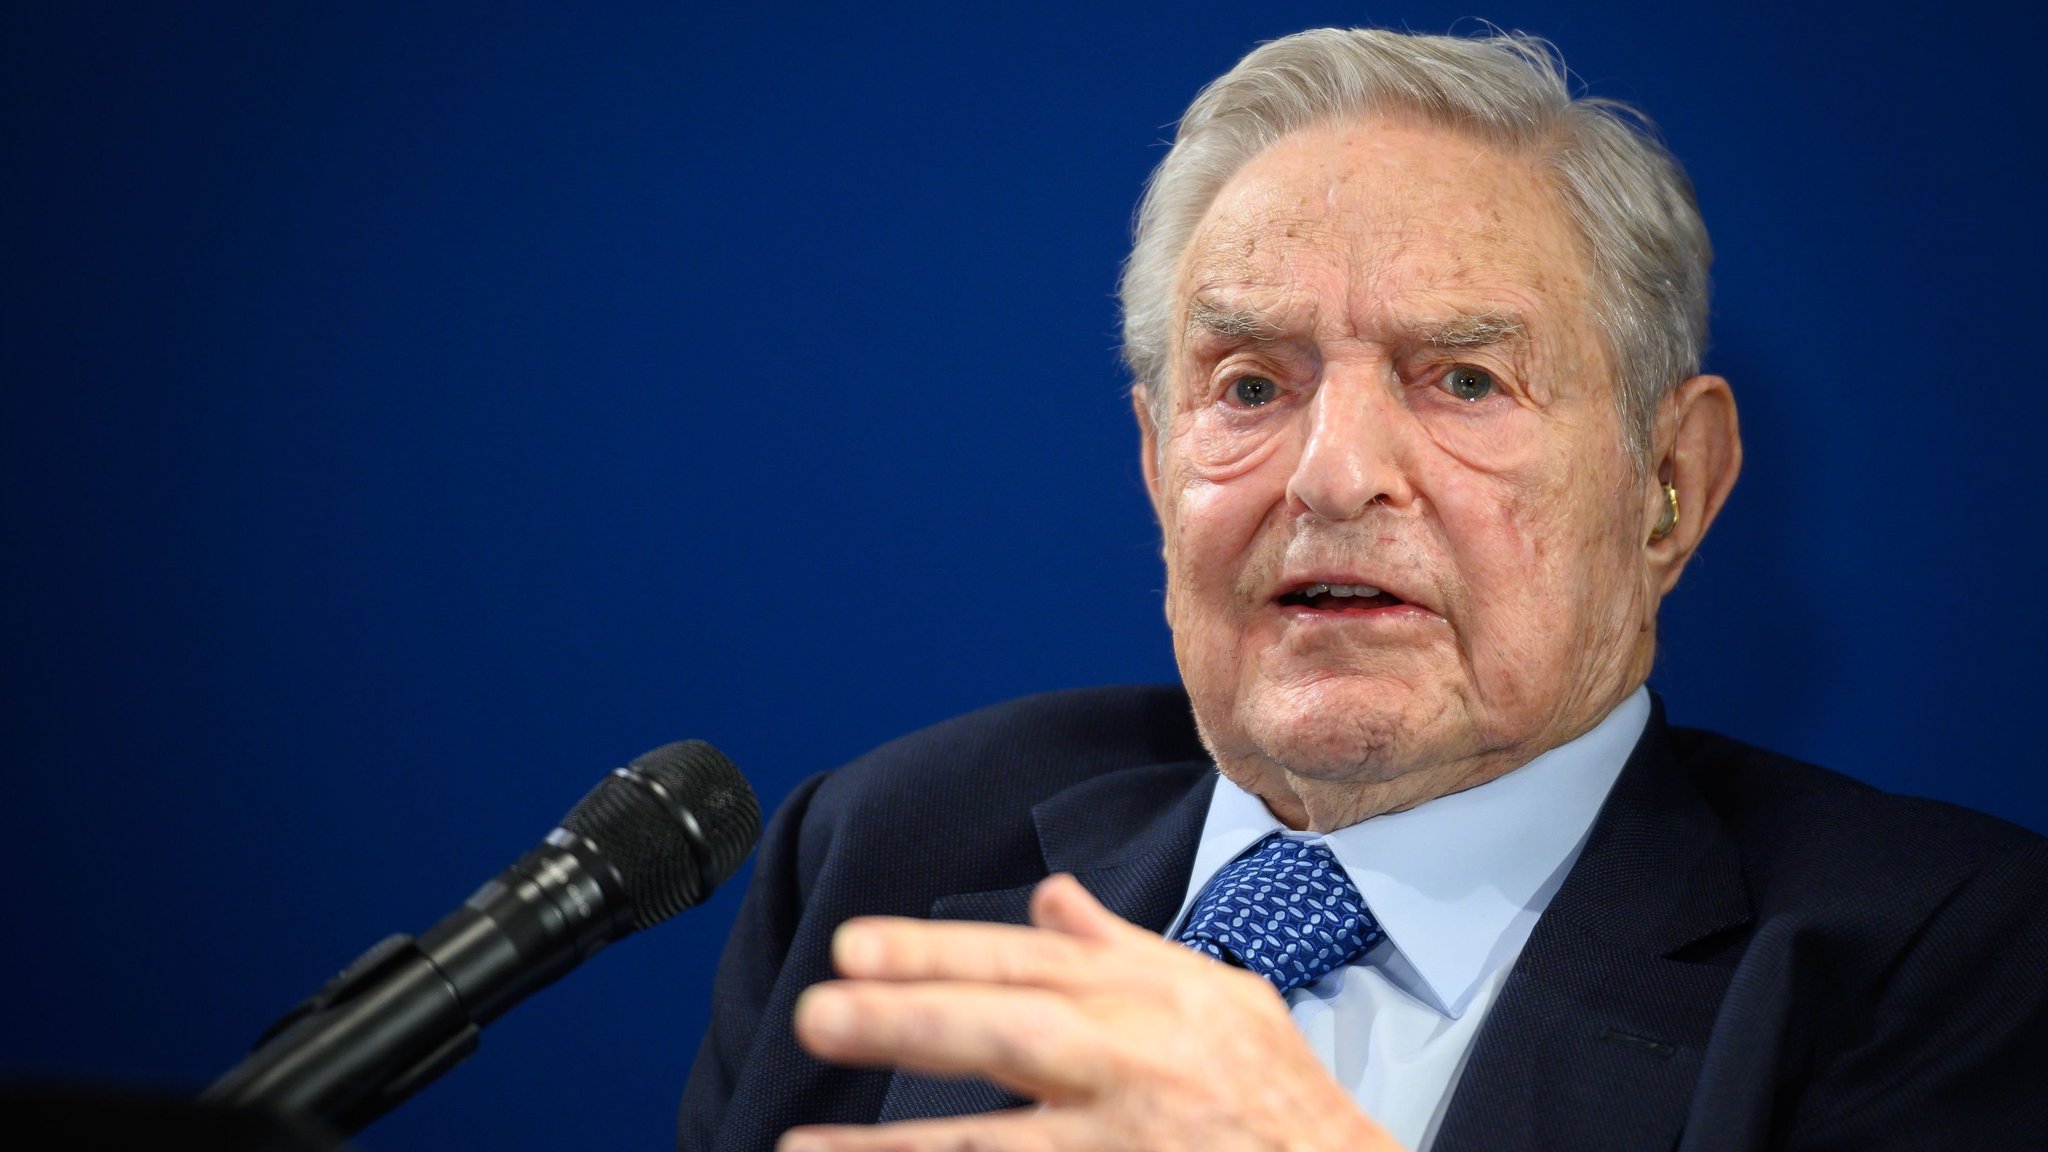 George Soros launches 1bn move to educate against nationalism